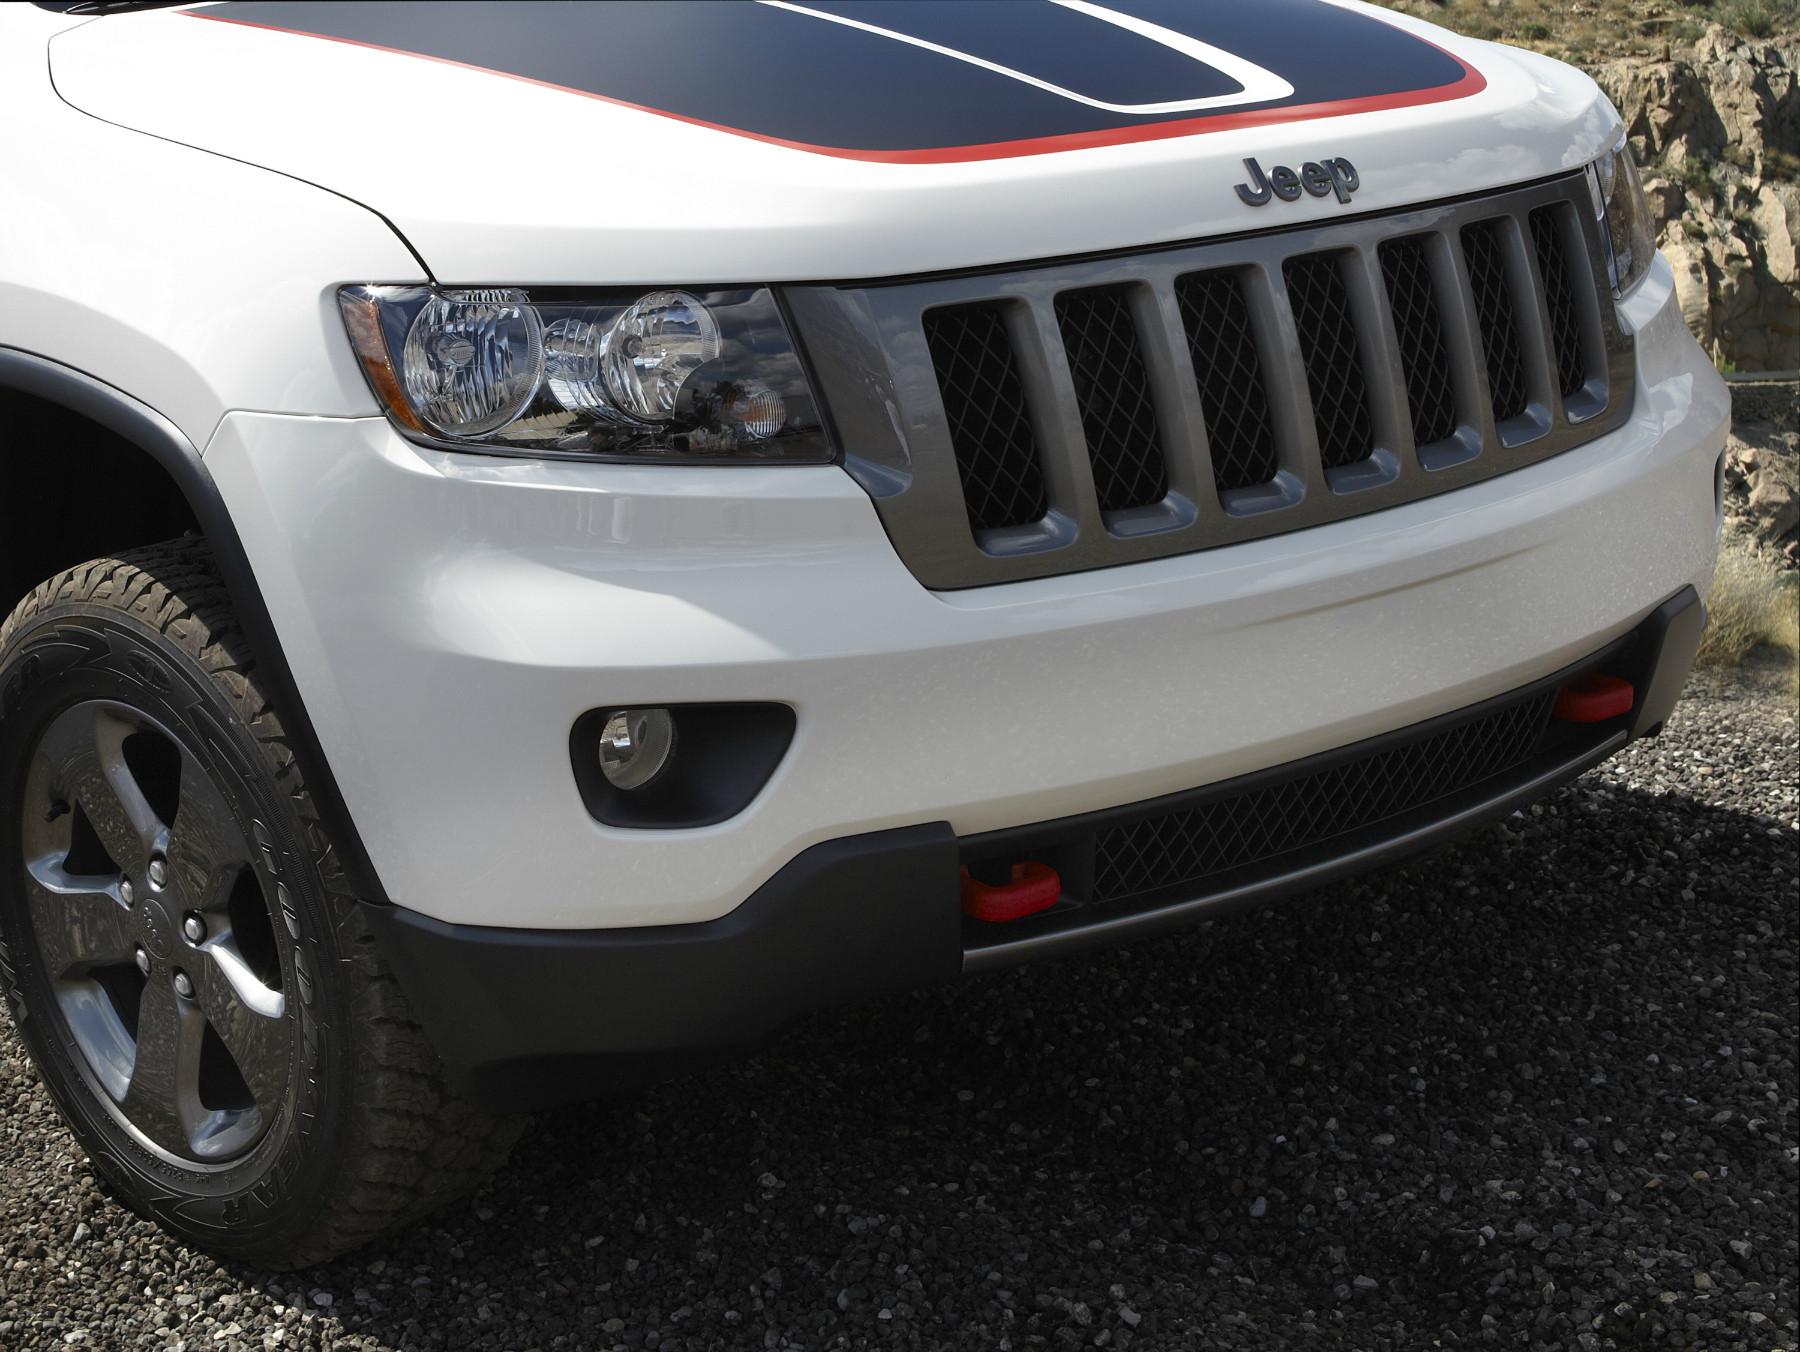 Black Jeep Cherokee Logo - Introducing the 2013 Jeep® Grand Cherokee Trailhawk - The Jeep Blog